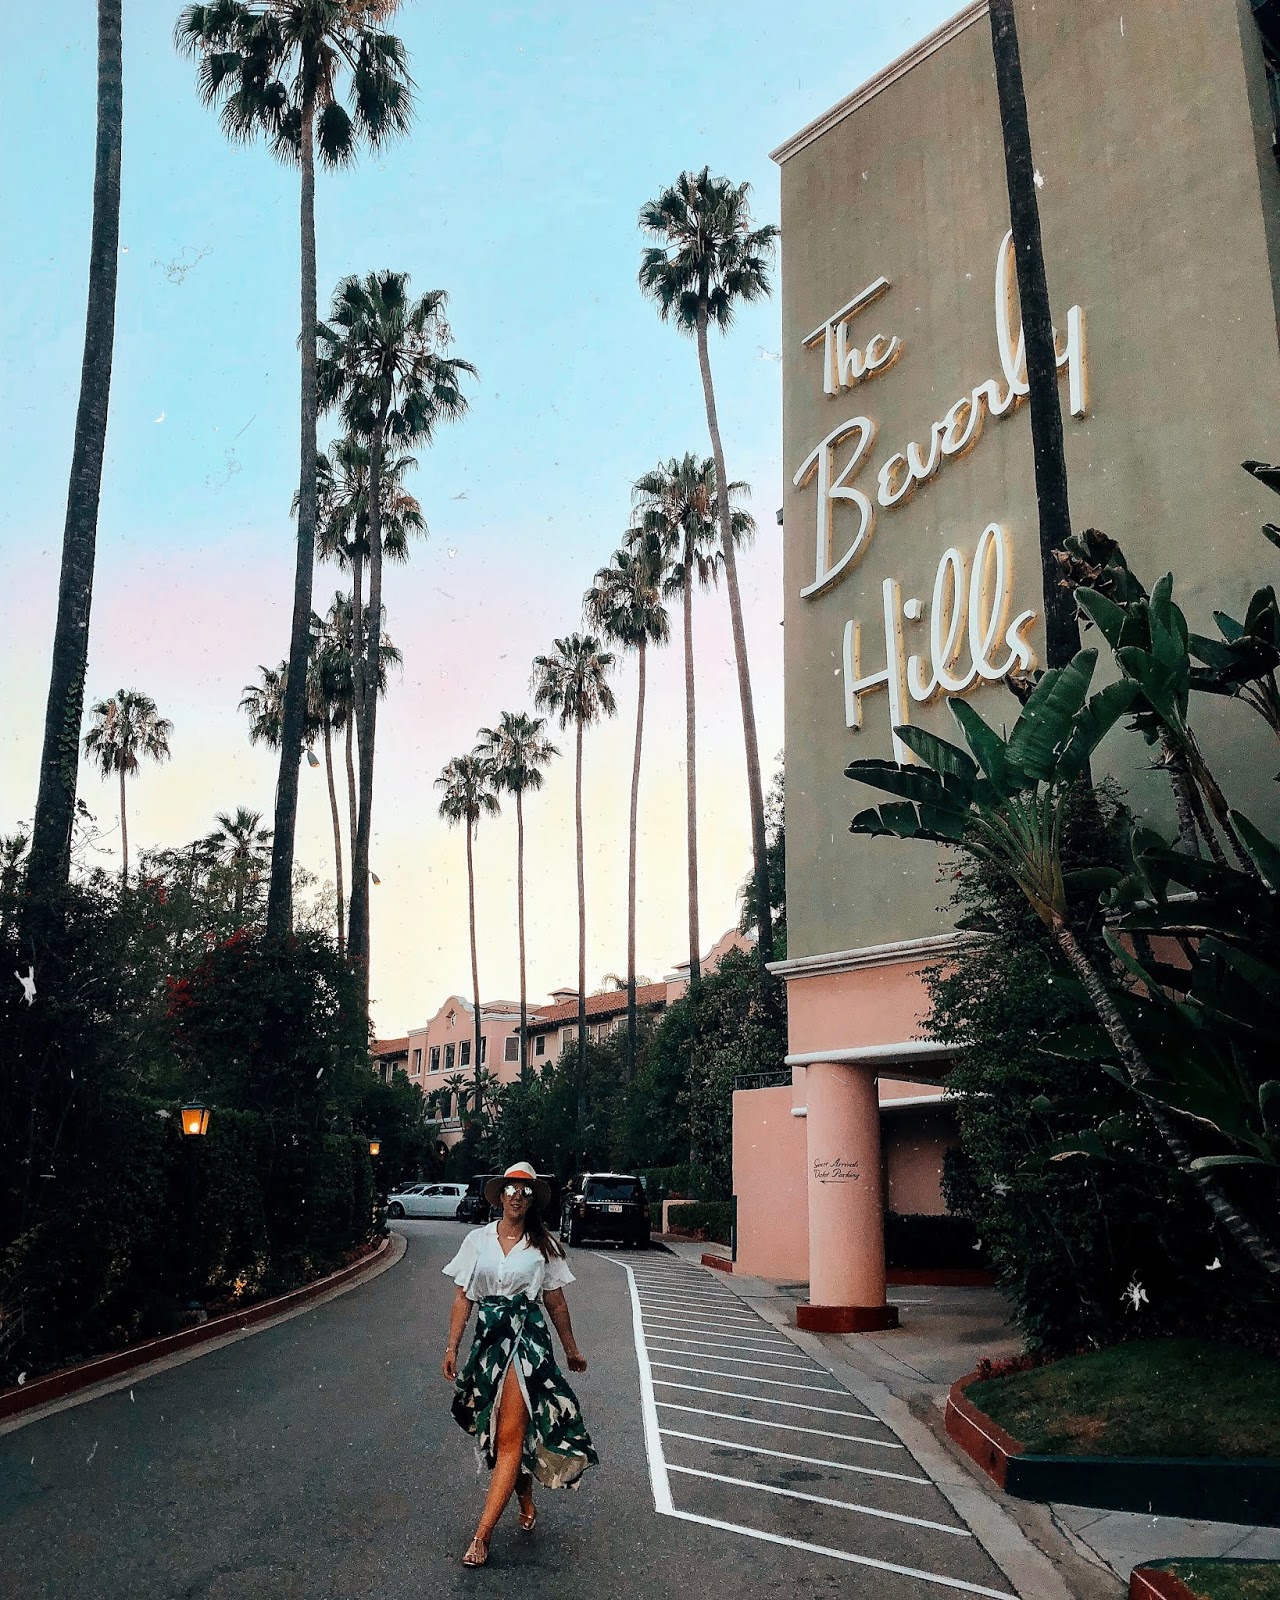 THE BEVERLY HILLS HOTEL SIGN